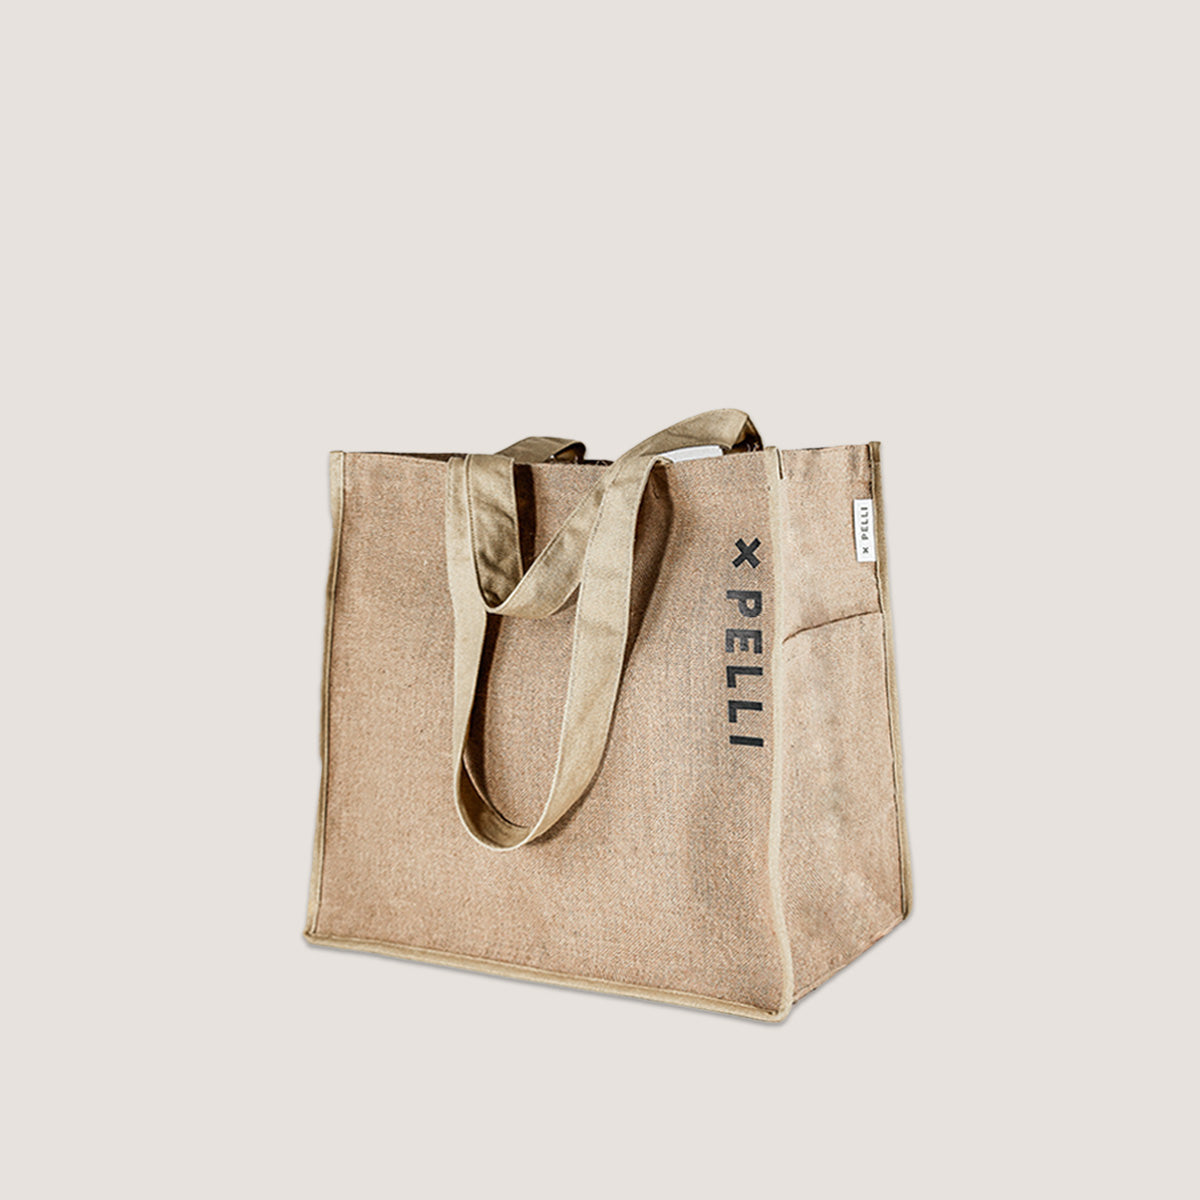 Load image into Gallery viewer, jute shopping bags australia
